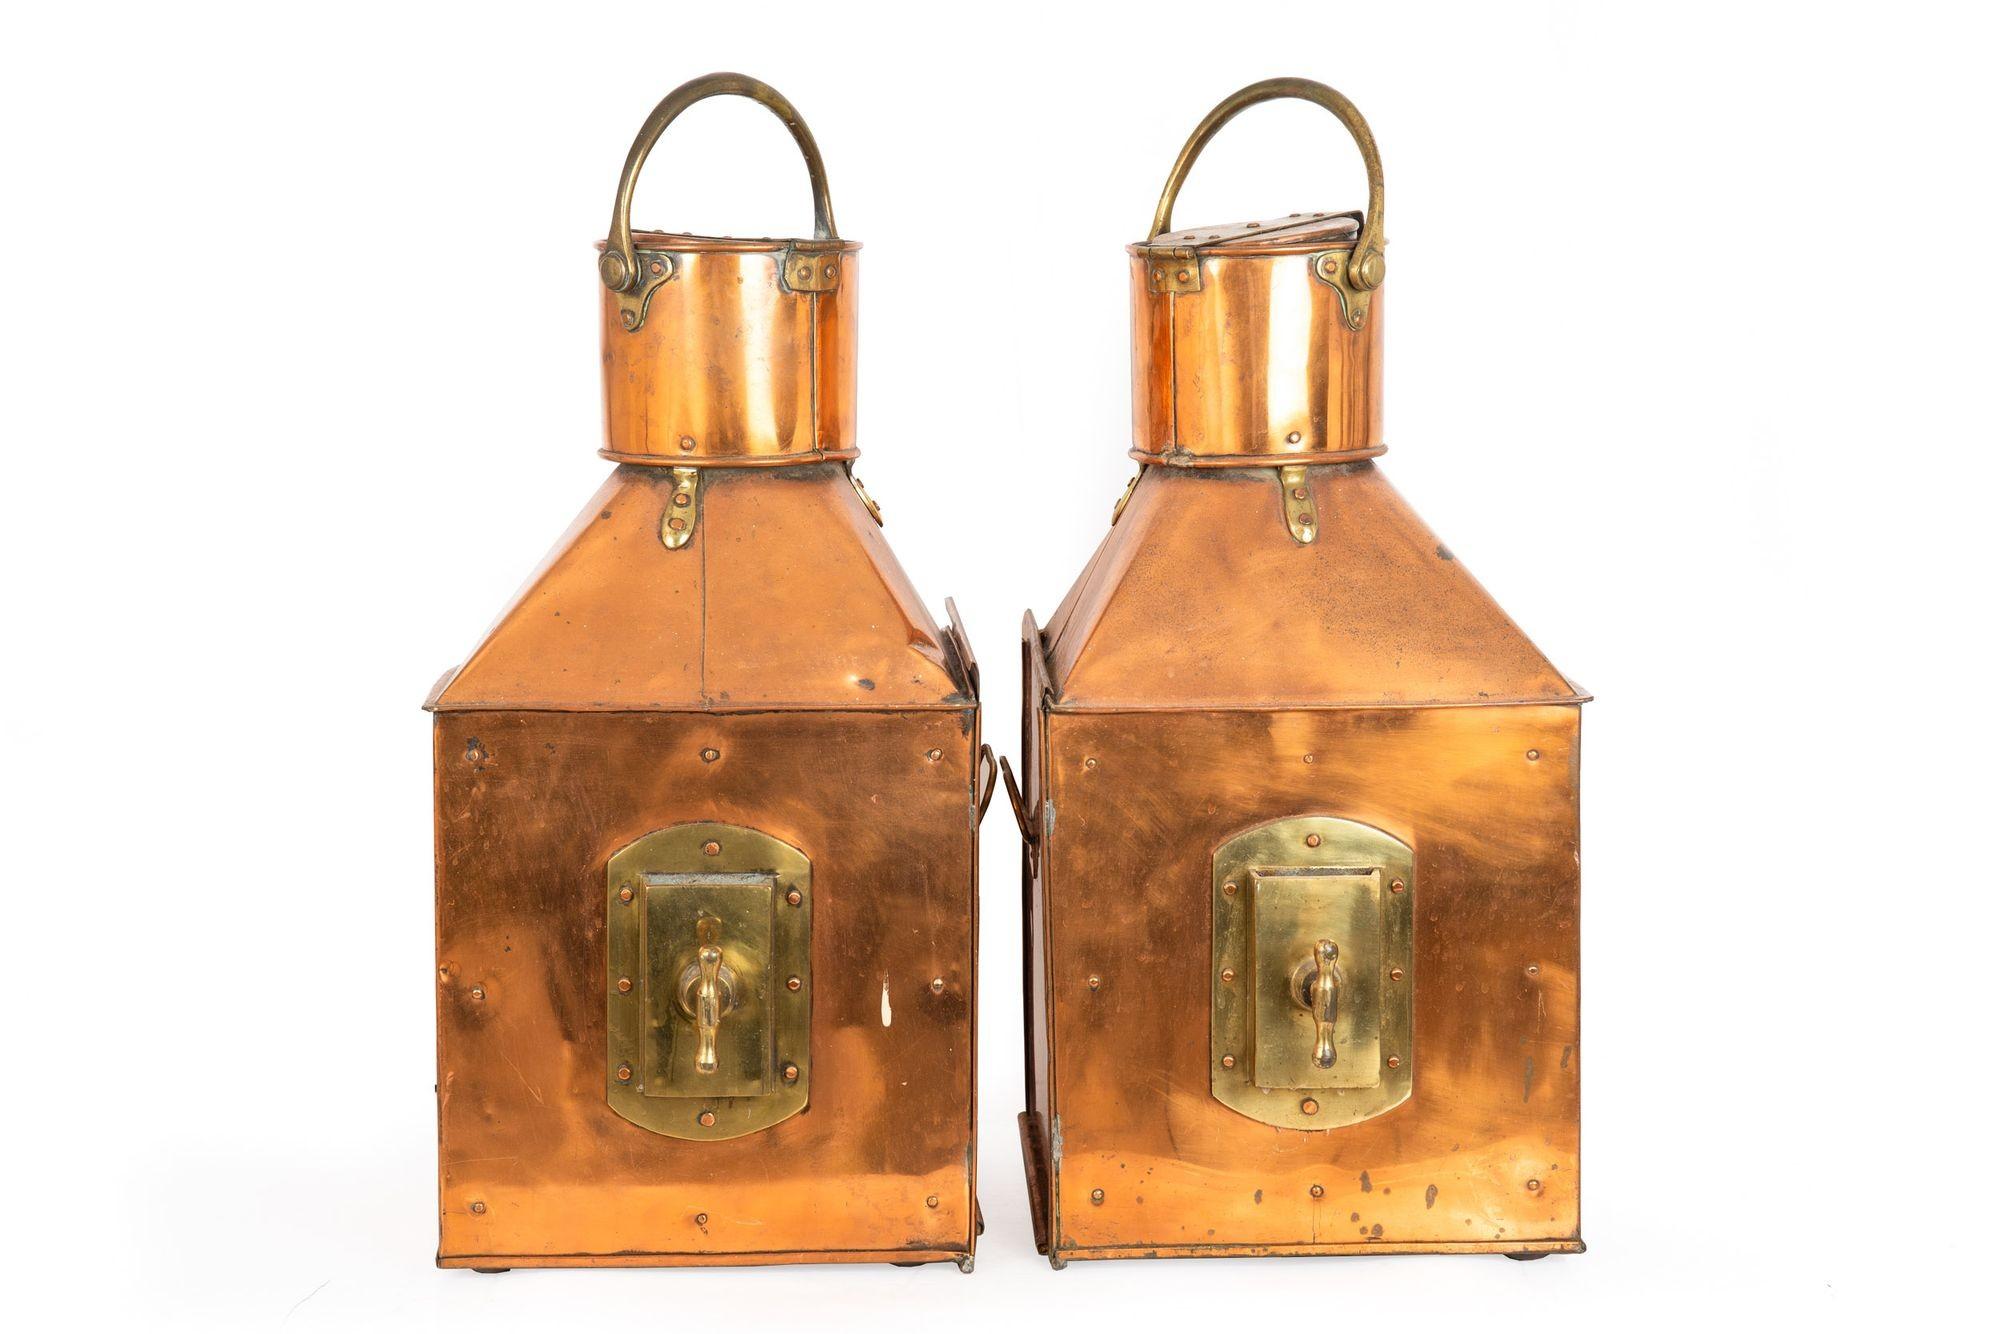 MASSIVE PAIR OF HUGH DOUGLAS COPPER STARBOARD AND PORT SHIP LANTERNS
Each with applied relief maker's plaques and serial numbers of 148 & 149
Item # 301PJO23A 

A nice pair of original ship lanterns from the early 20th century by the firm of Hugh